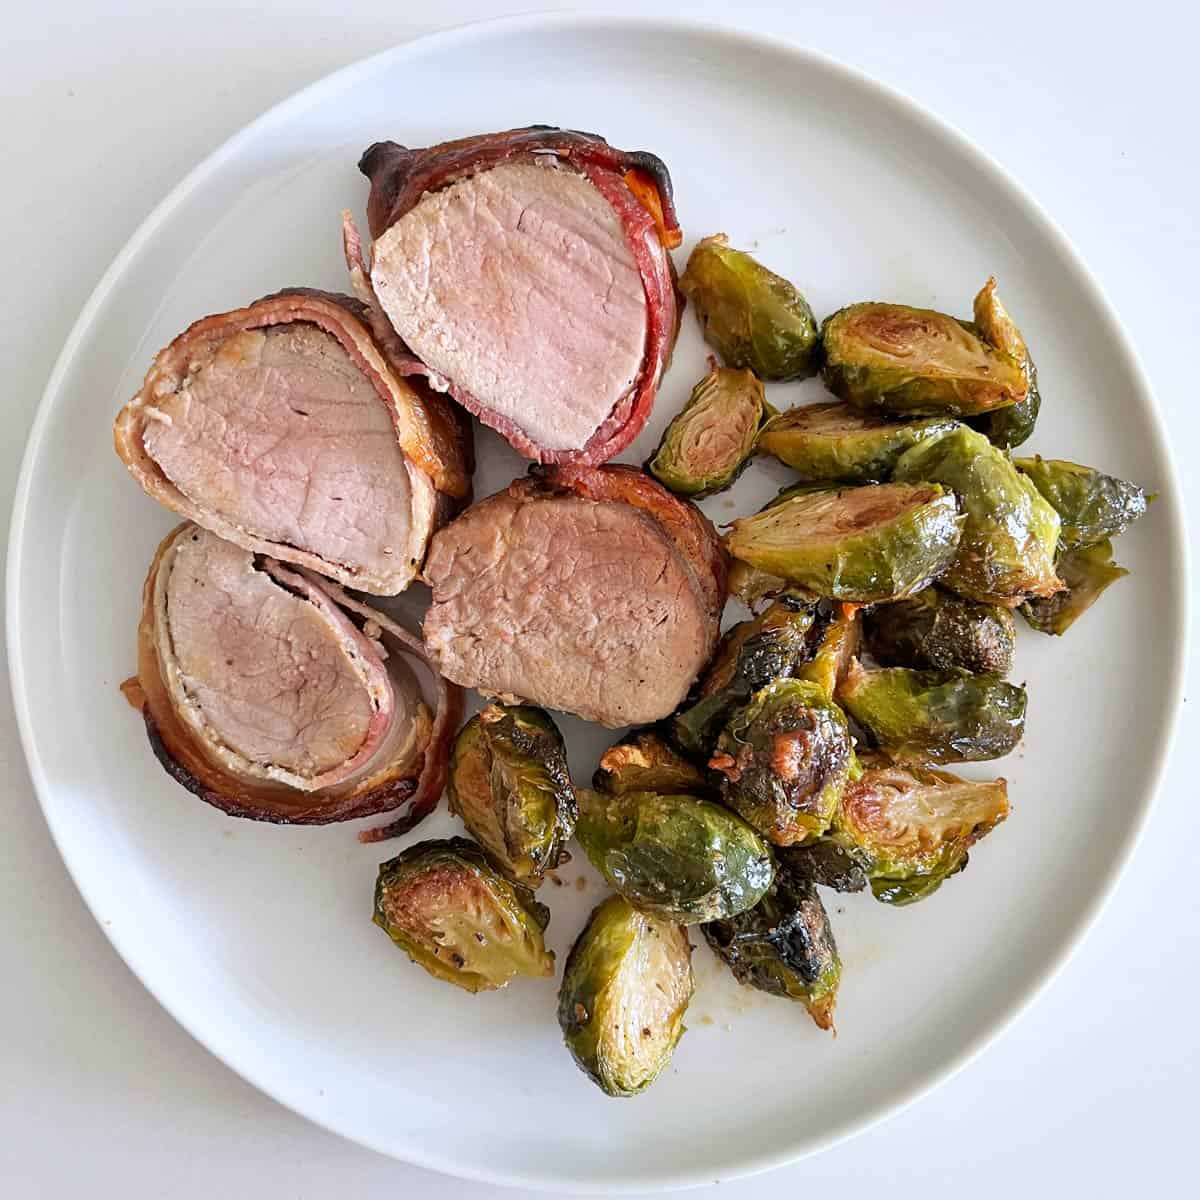 Bacon-wrapped pork tenderloin leftovers are served with reheated Brussels sprouts.